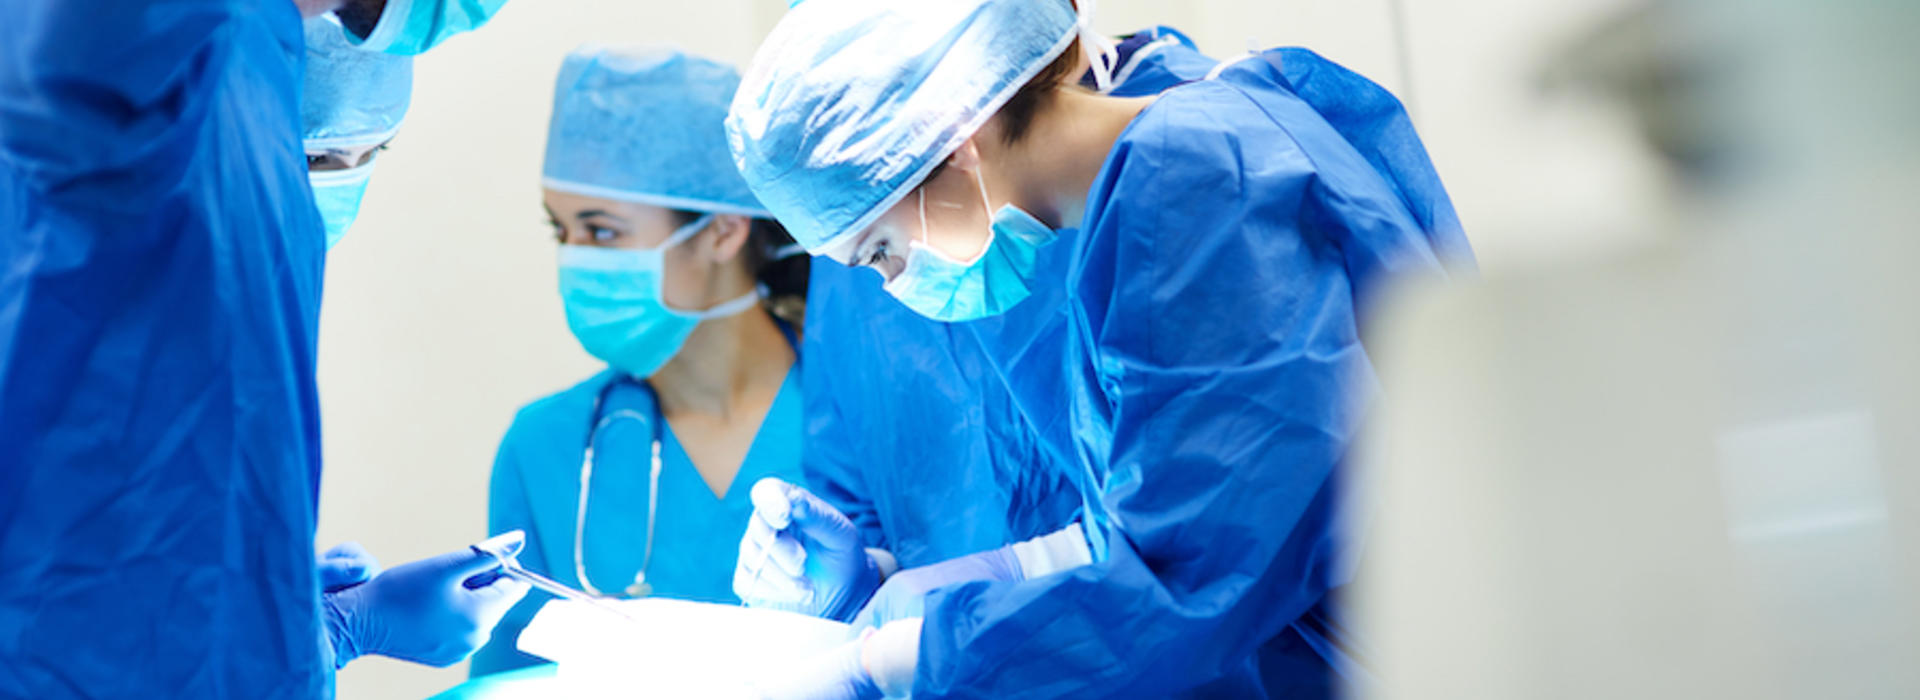 Surgeons operating on a patient